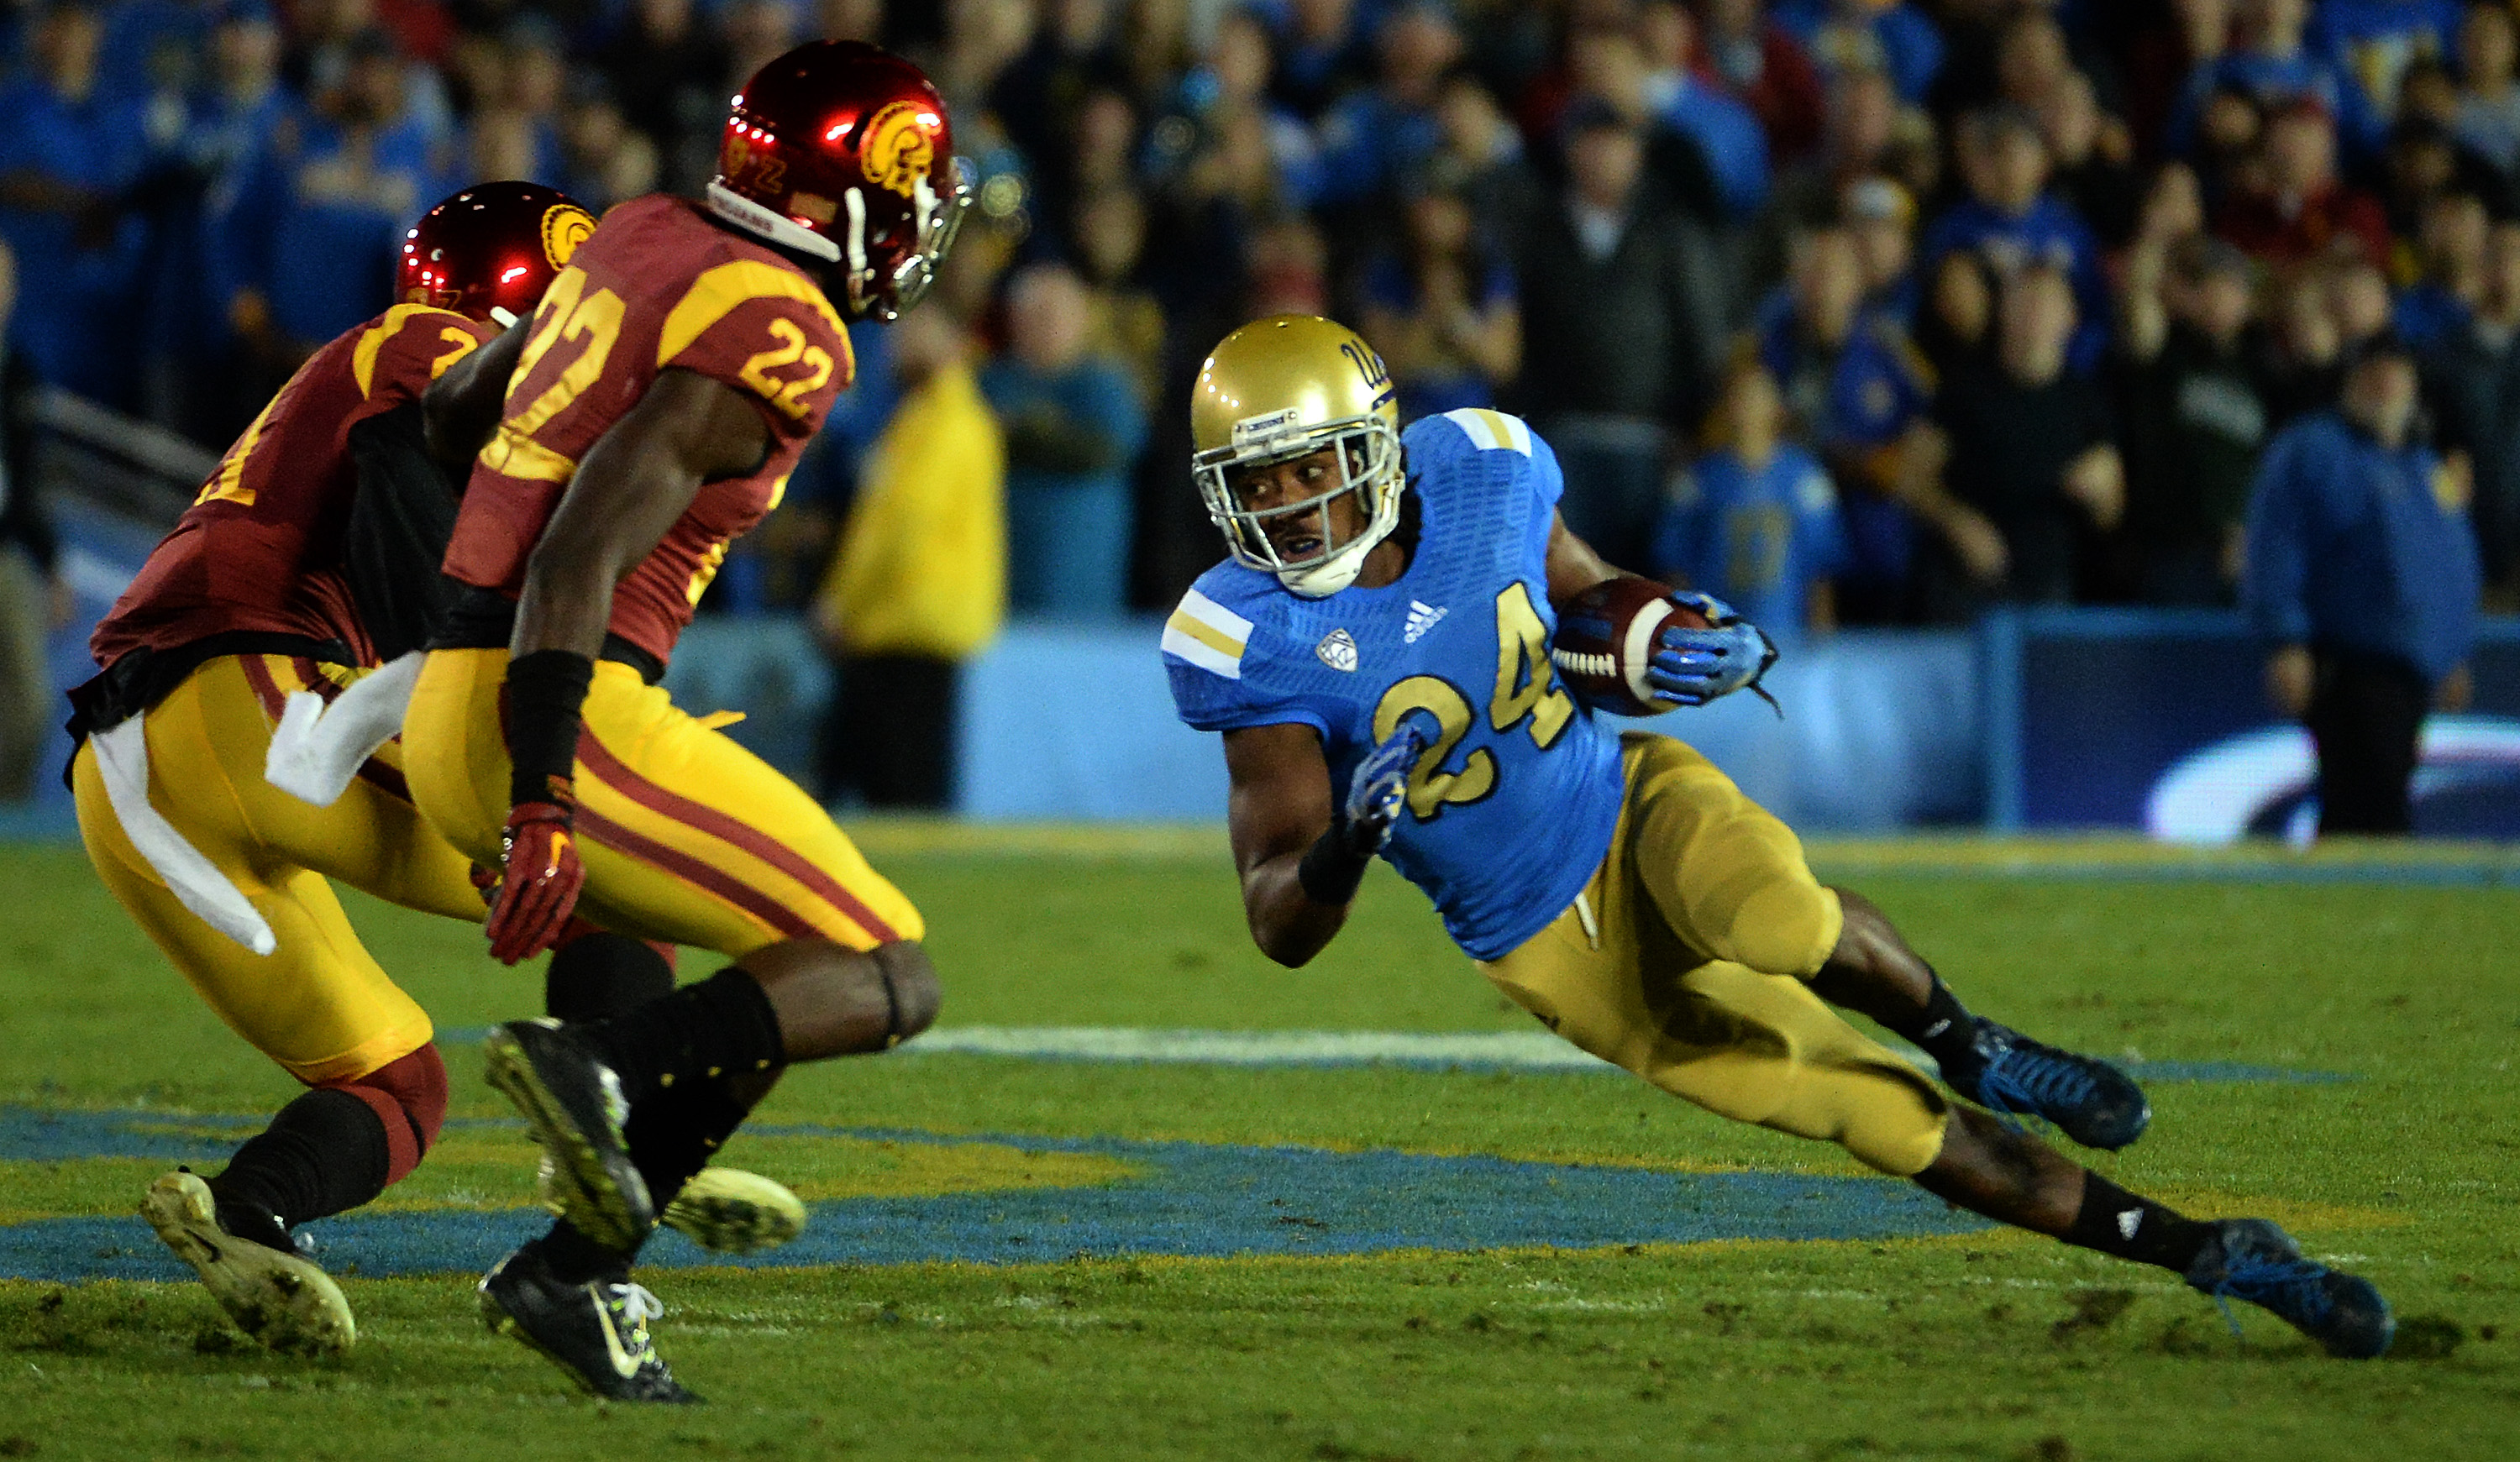 UCLA running back Paul Perkins ran for 93 yards and a touchdown in the Bruins' 38-20 win over USC last November. (Keith Birmingham/Staff)